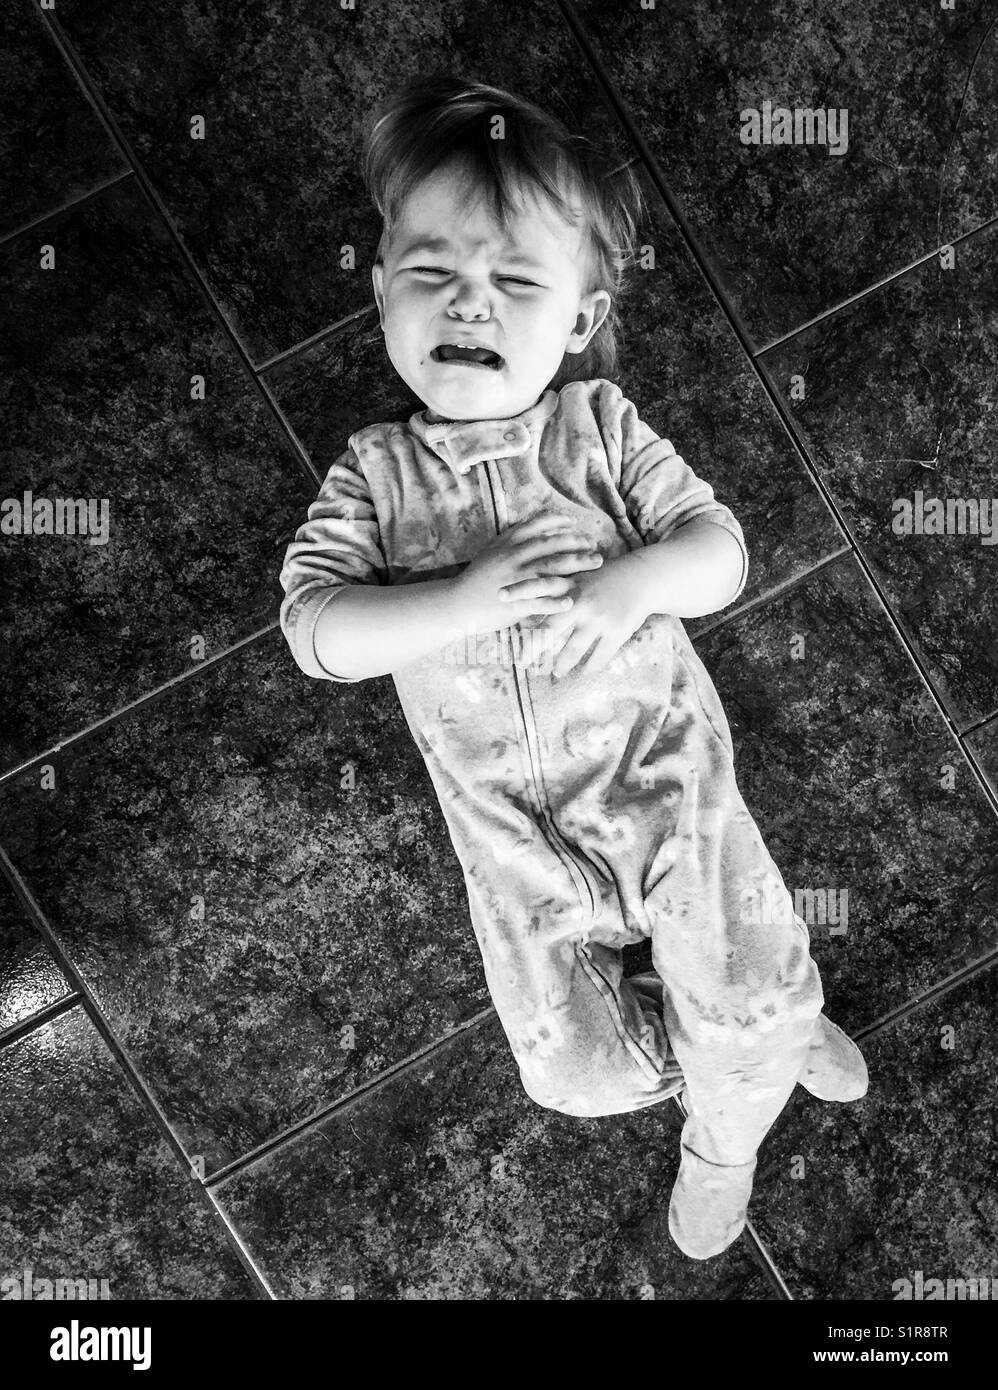 Black and white image of toddler crying on a tile floor Stock Photo